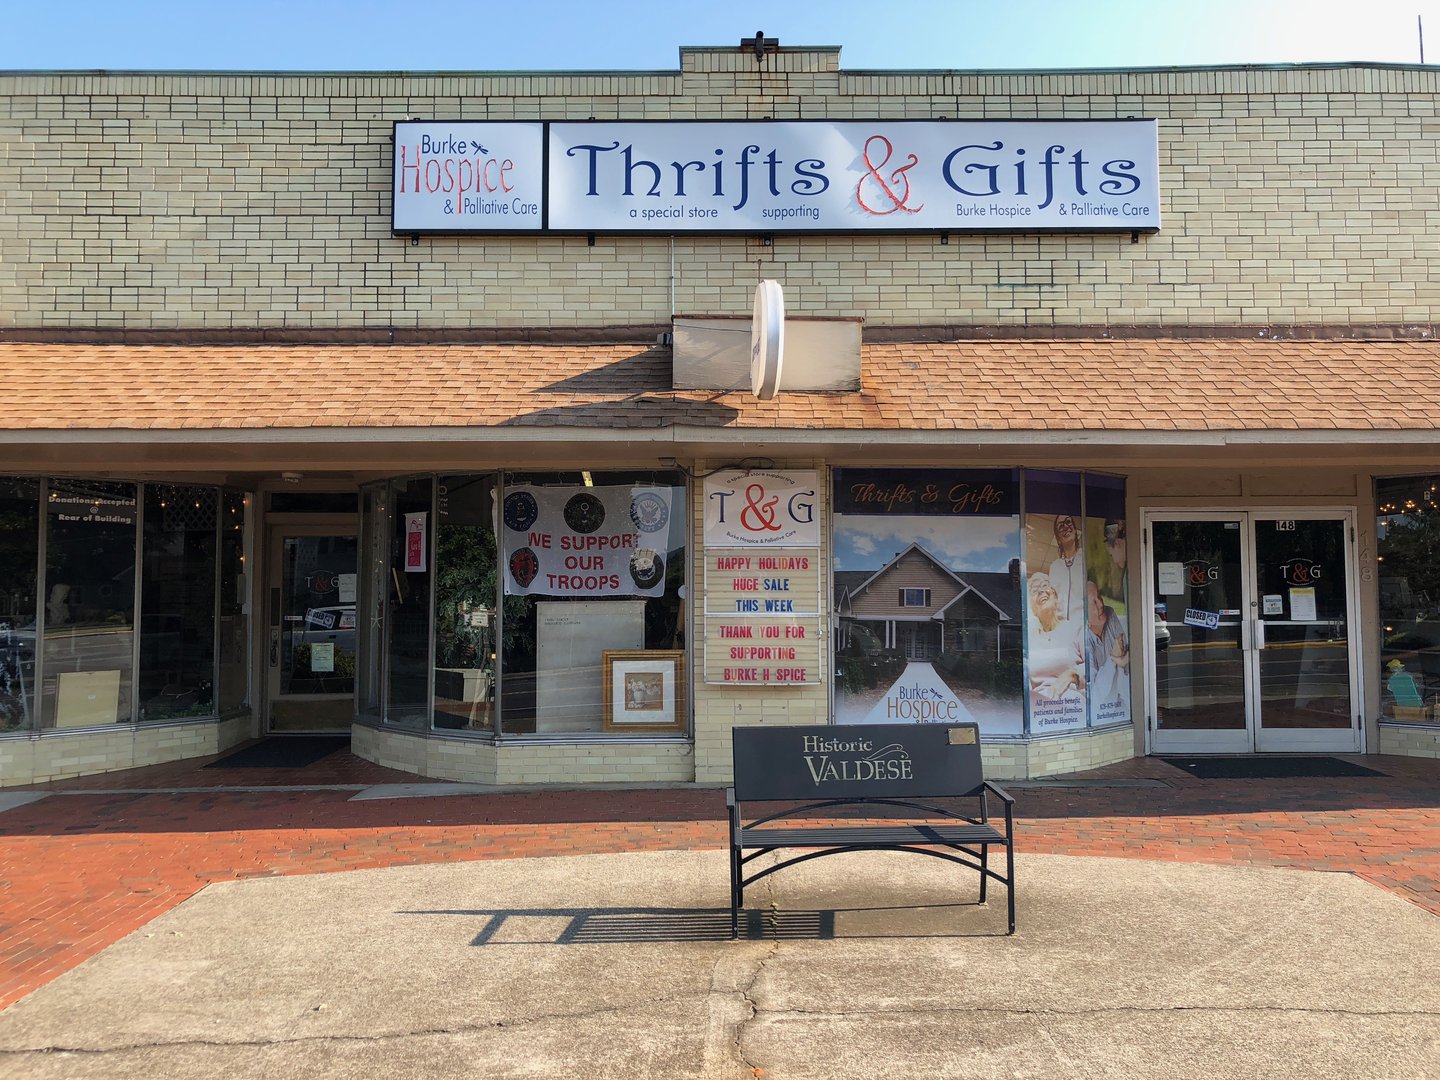 Thrifts & Gifts Storefront